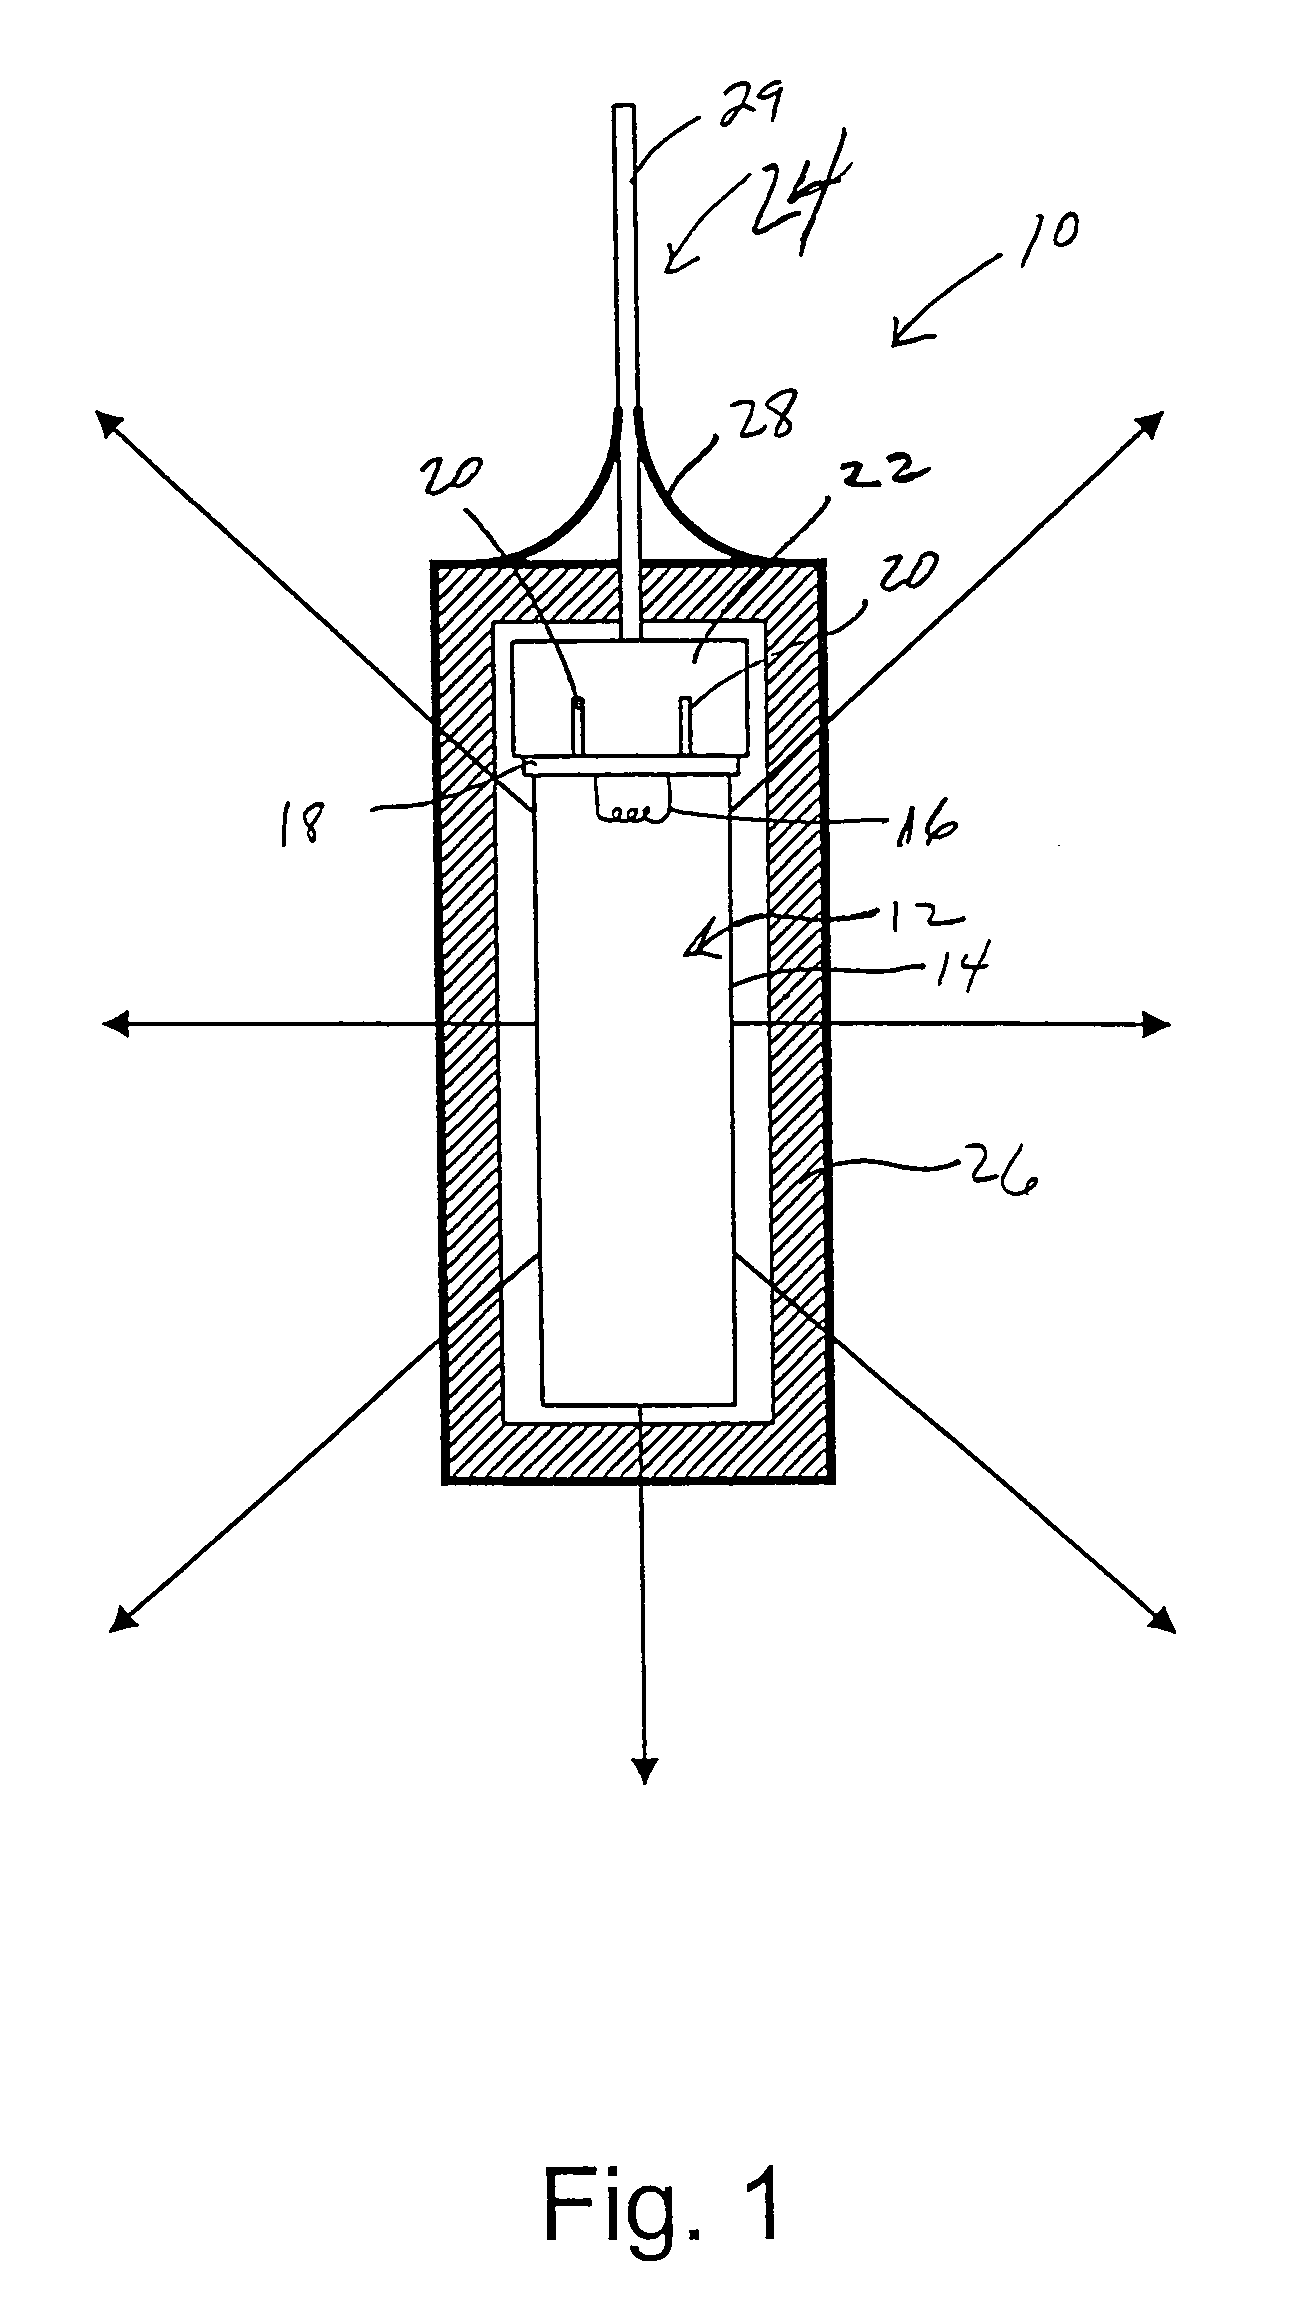 Methods and apparatus for disinfecting and sterilizing fluid using ultraviolet radiation